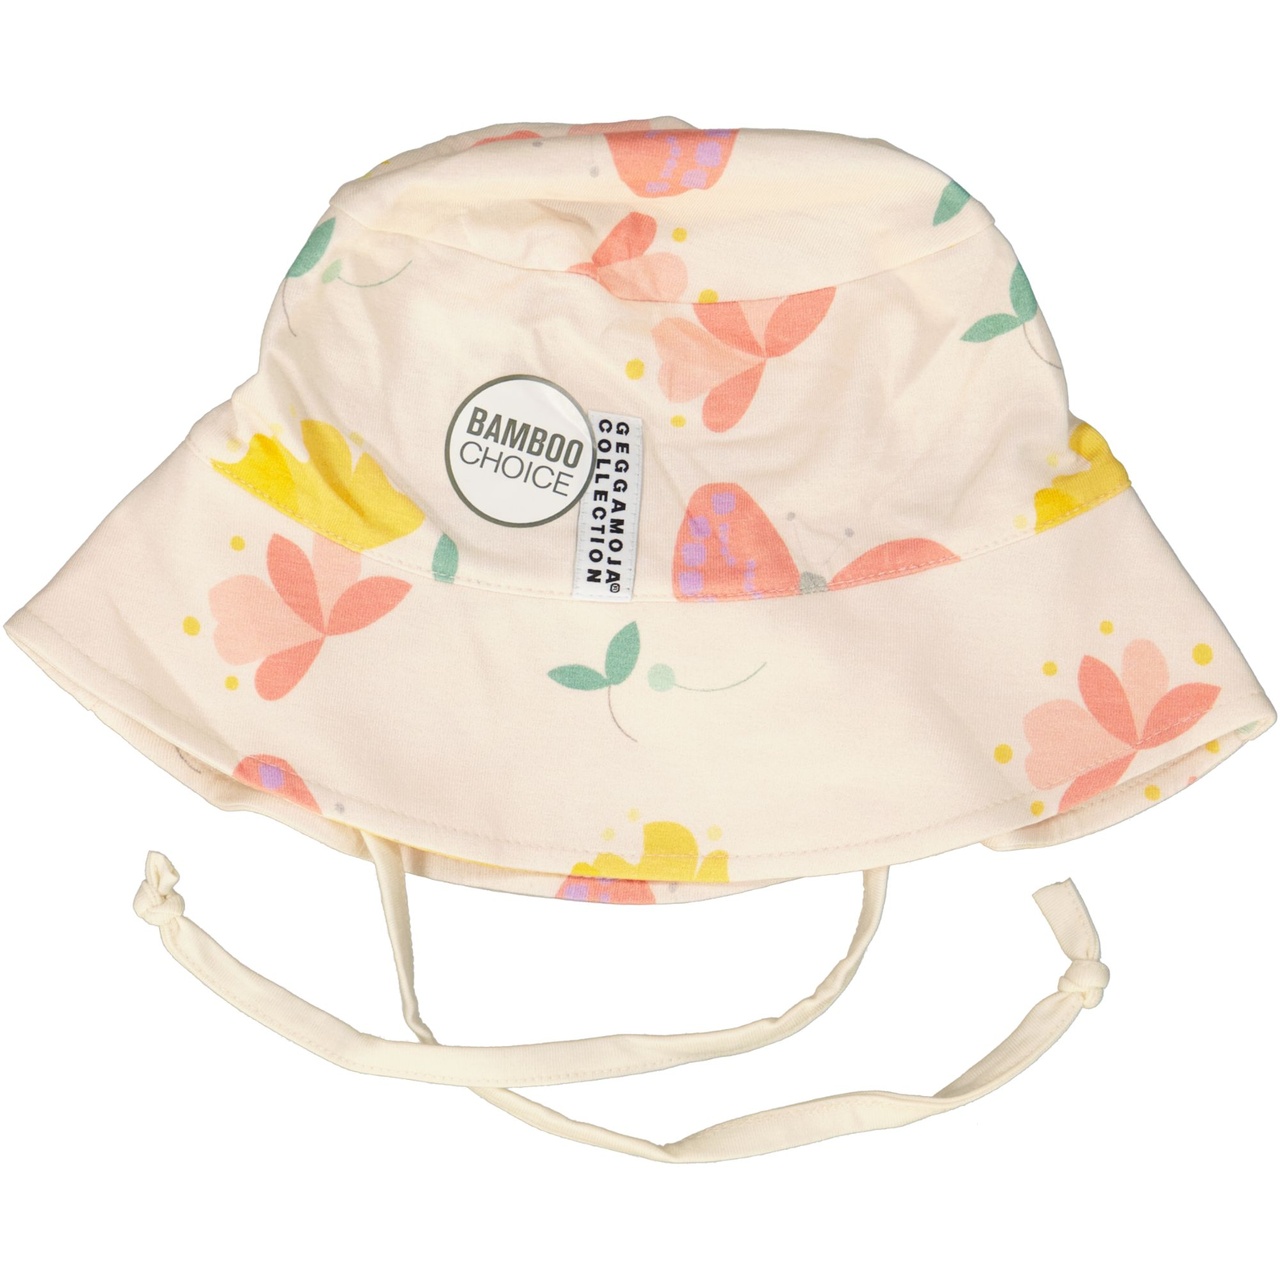 Bamboo Sunny hat Butterfly  10m-2Y